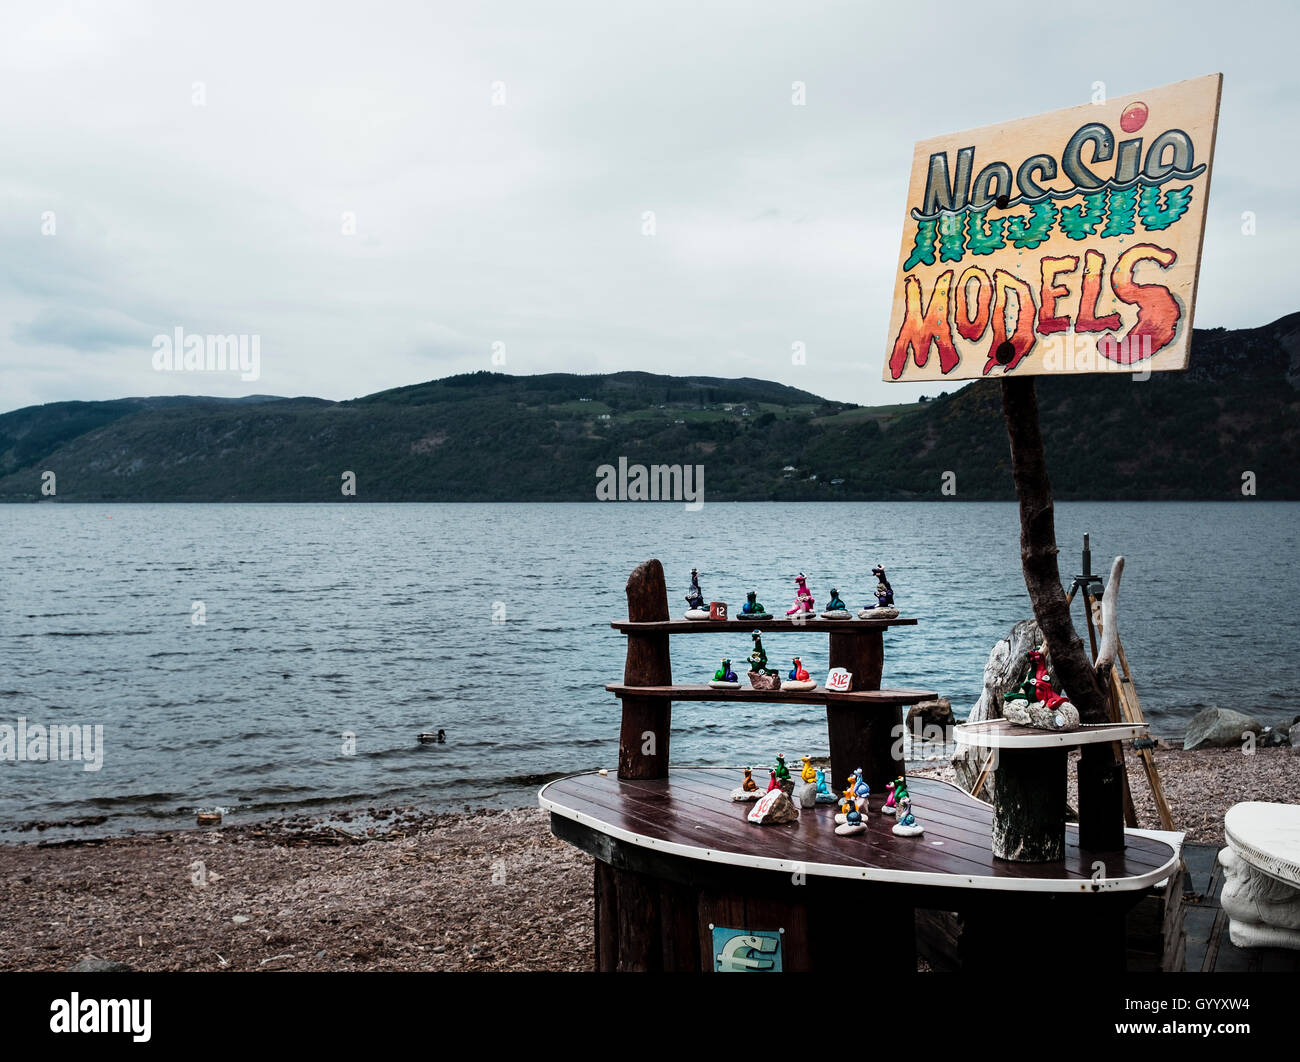 Shores of Loch Ness, sales booth with plastic figures of the monster Nessie, Dores, Highland, Scotland, United Kingdom Stock Photo